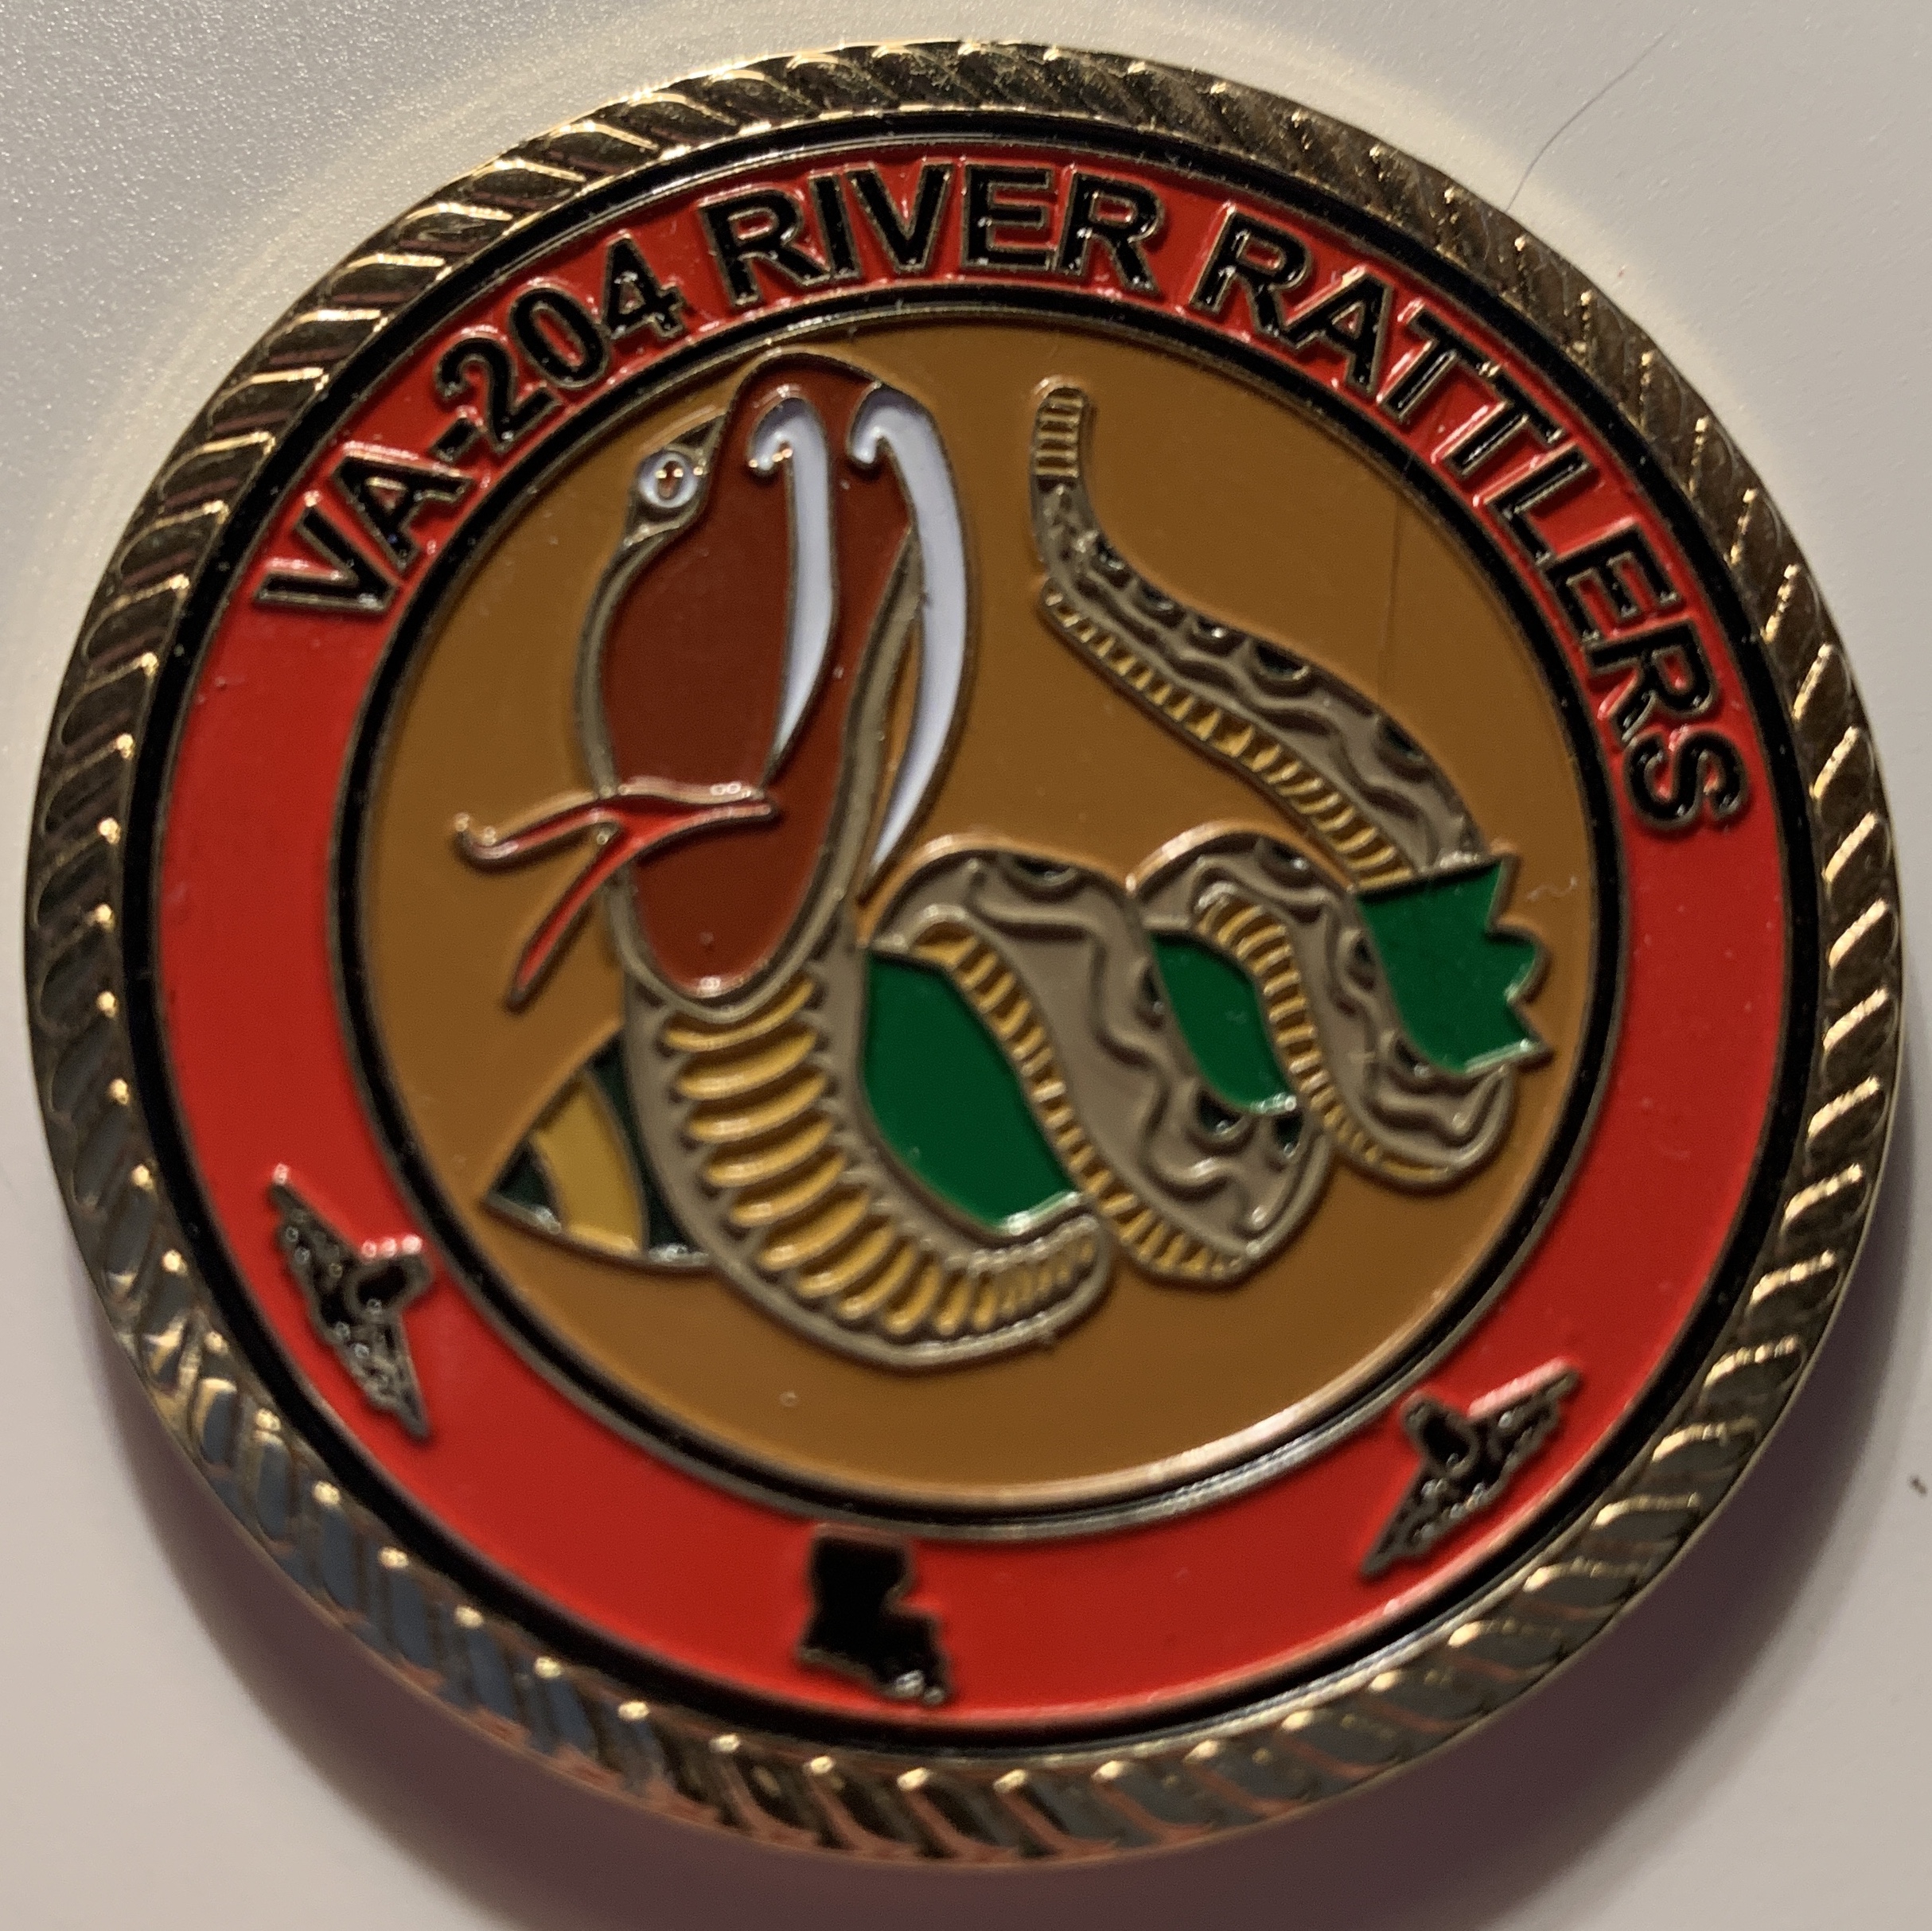 A-7E / VA-204 'RIVER RATTLERS' Coin (Front)